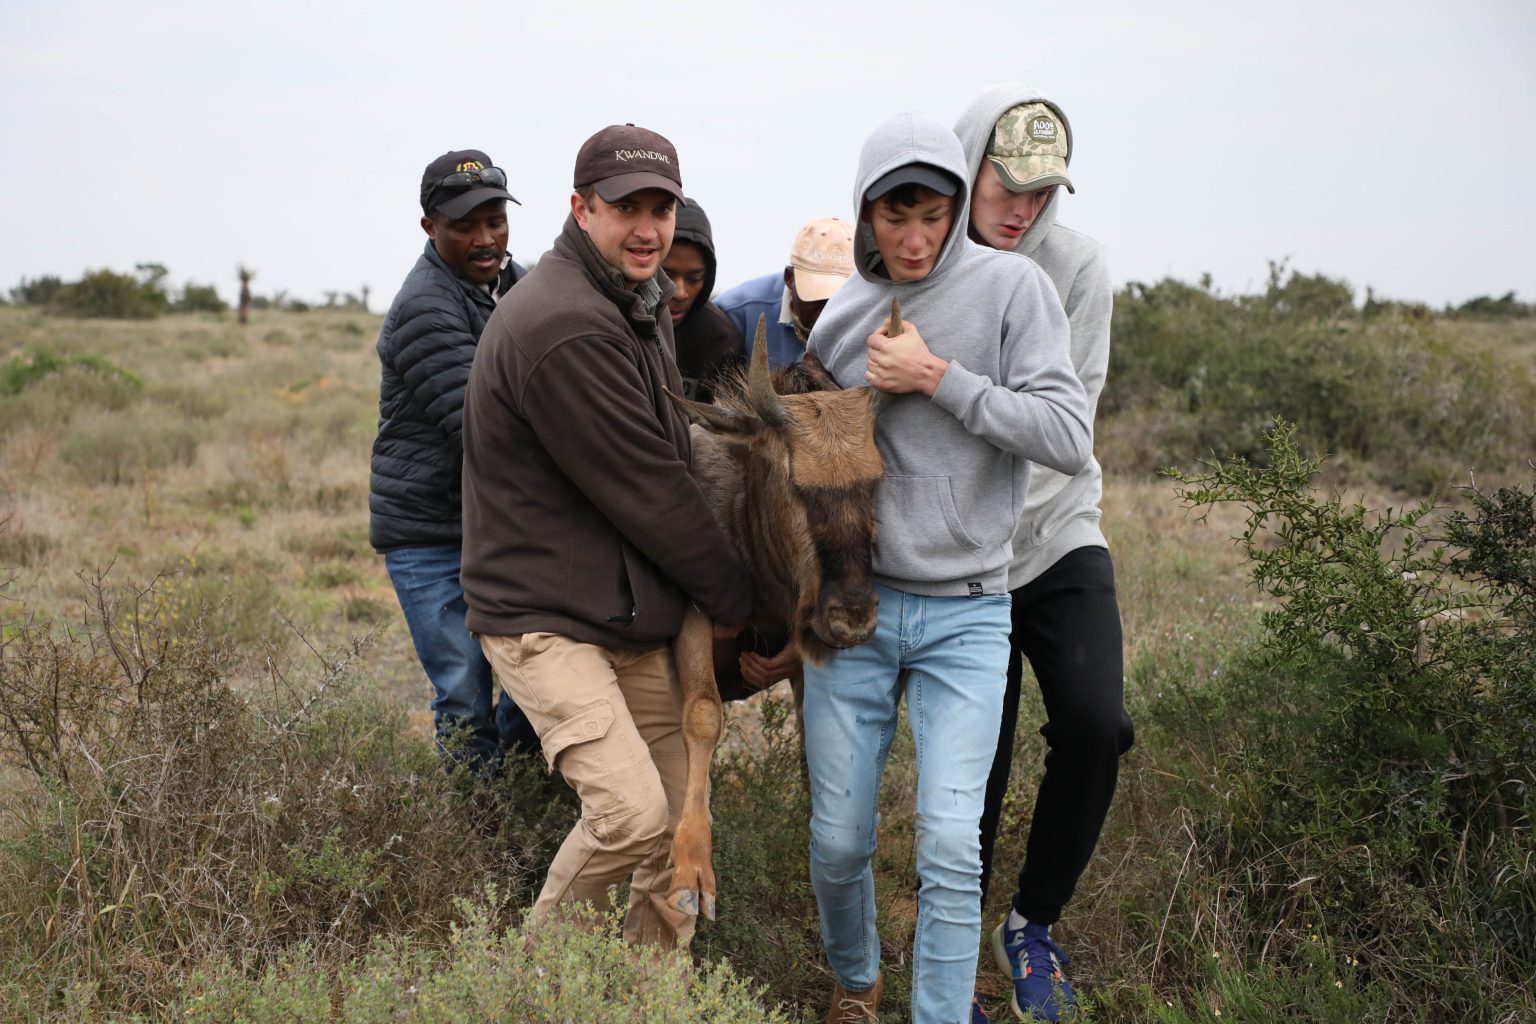 Kingswood College Head of Gap Year Zweli Mbenyana and Gap Year students Qhawe Nogoduka, Michael van Staden and David le Roux help Kwandwe private Game reserve's Craig Sholt-Douglas to relocate darted Wildebeest on the reserve. Photo: Jackie Clausen